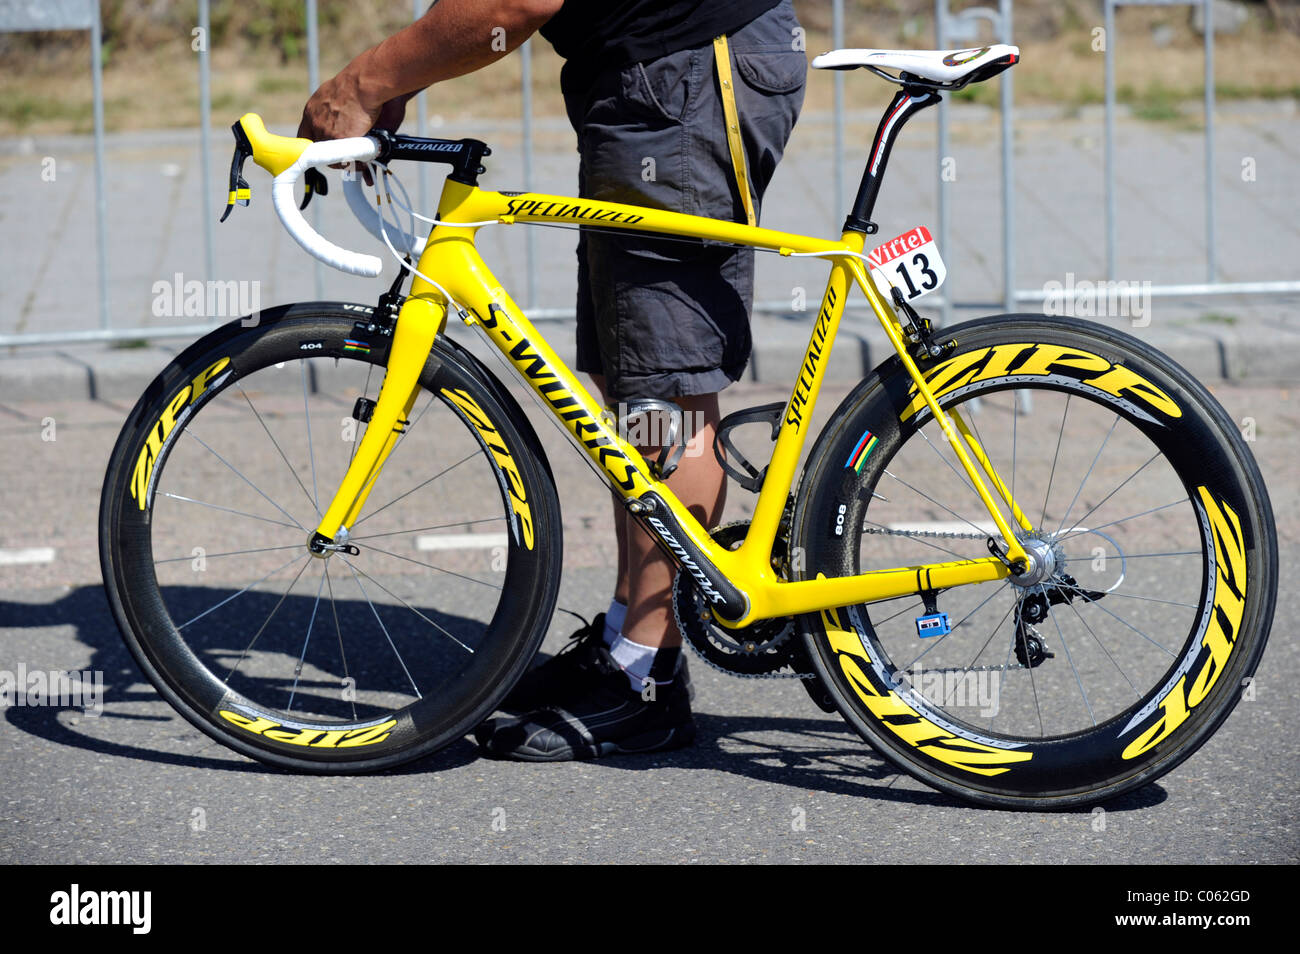 Fabian Cancellara's special bicycle in yellow, Tour de France 2010, Rotterdam, Netherlands, Europe Stock Photo